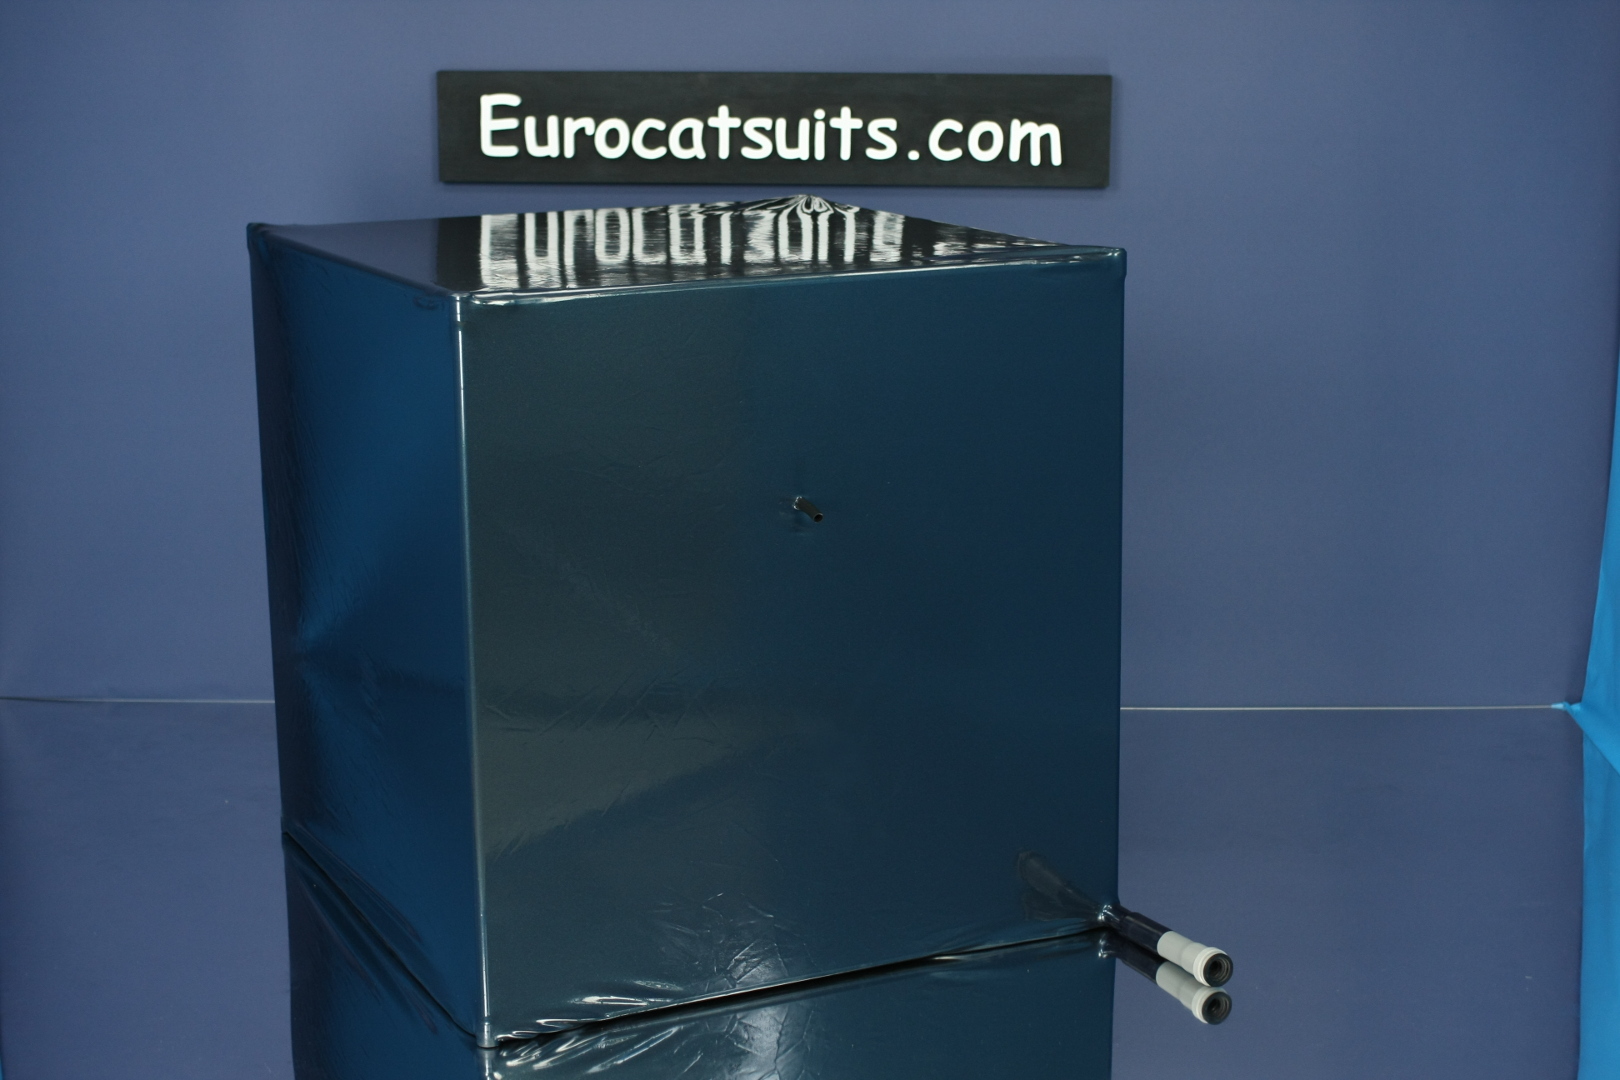 airtight latex vacuumcube in metallic black , with stailess steel frame. Click to see full resolution image.